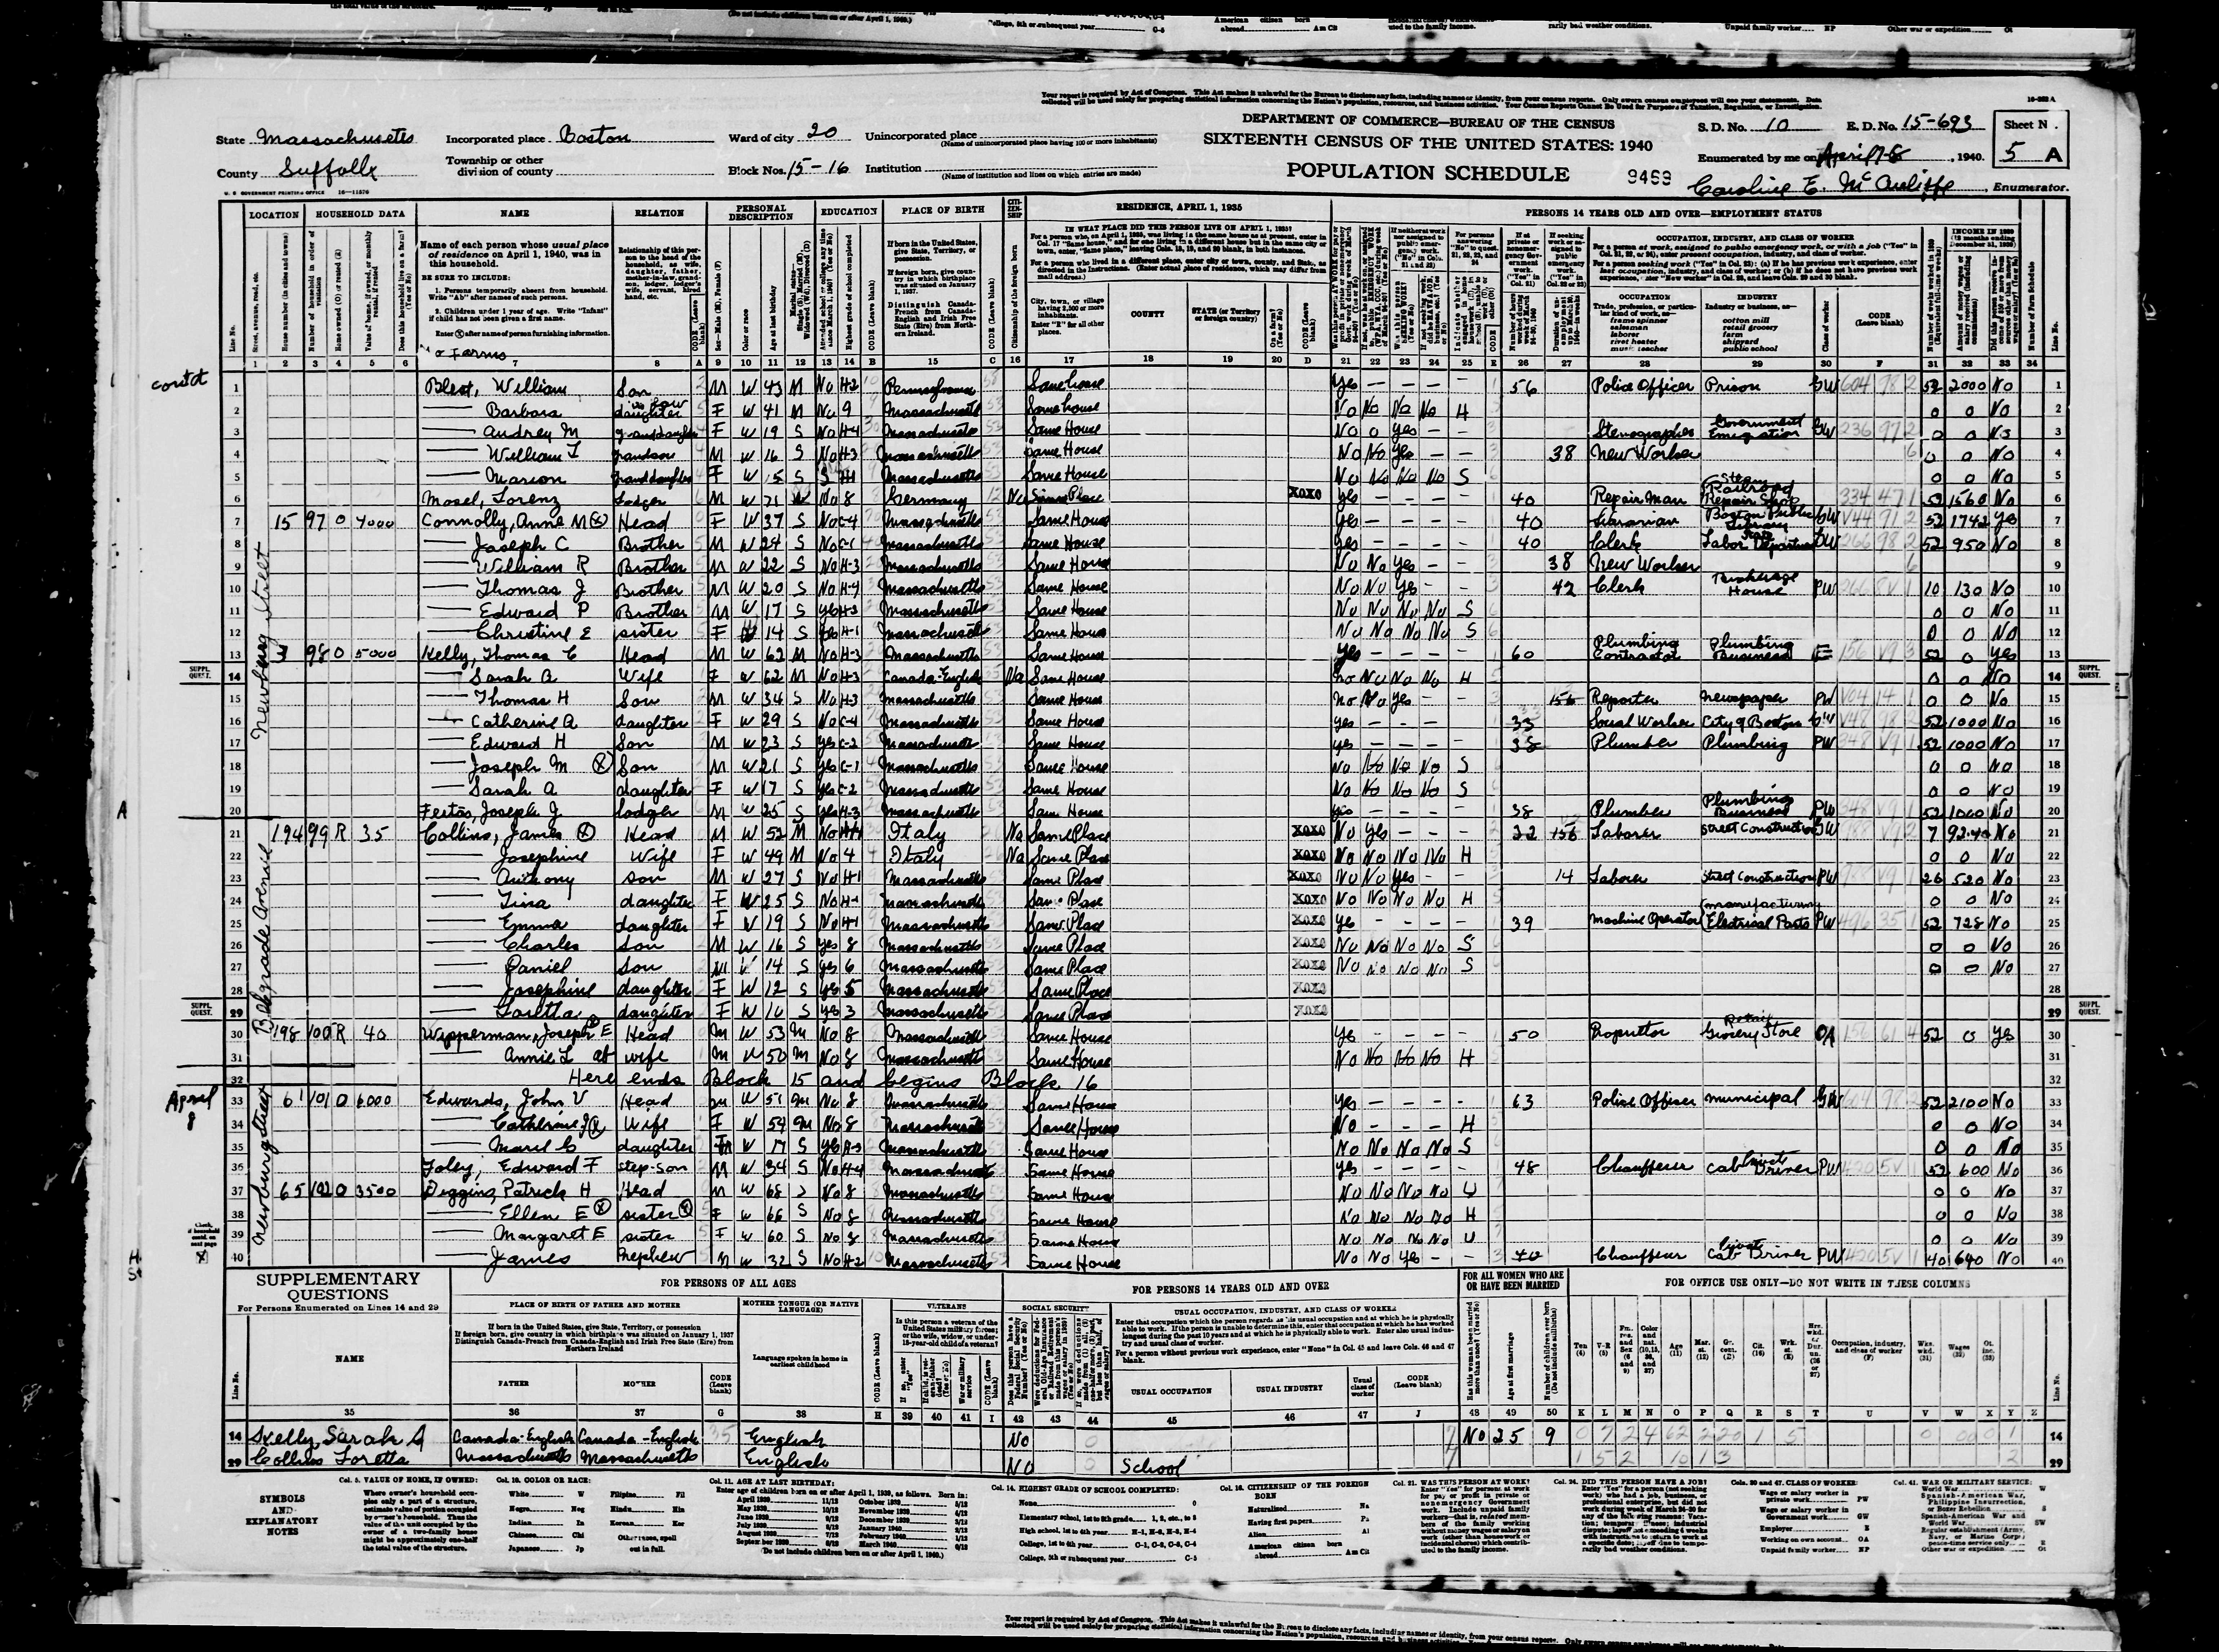 1940 US Census, Edward Connolly, line 11